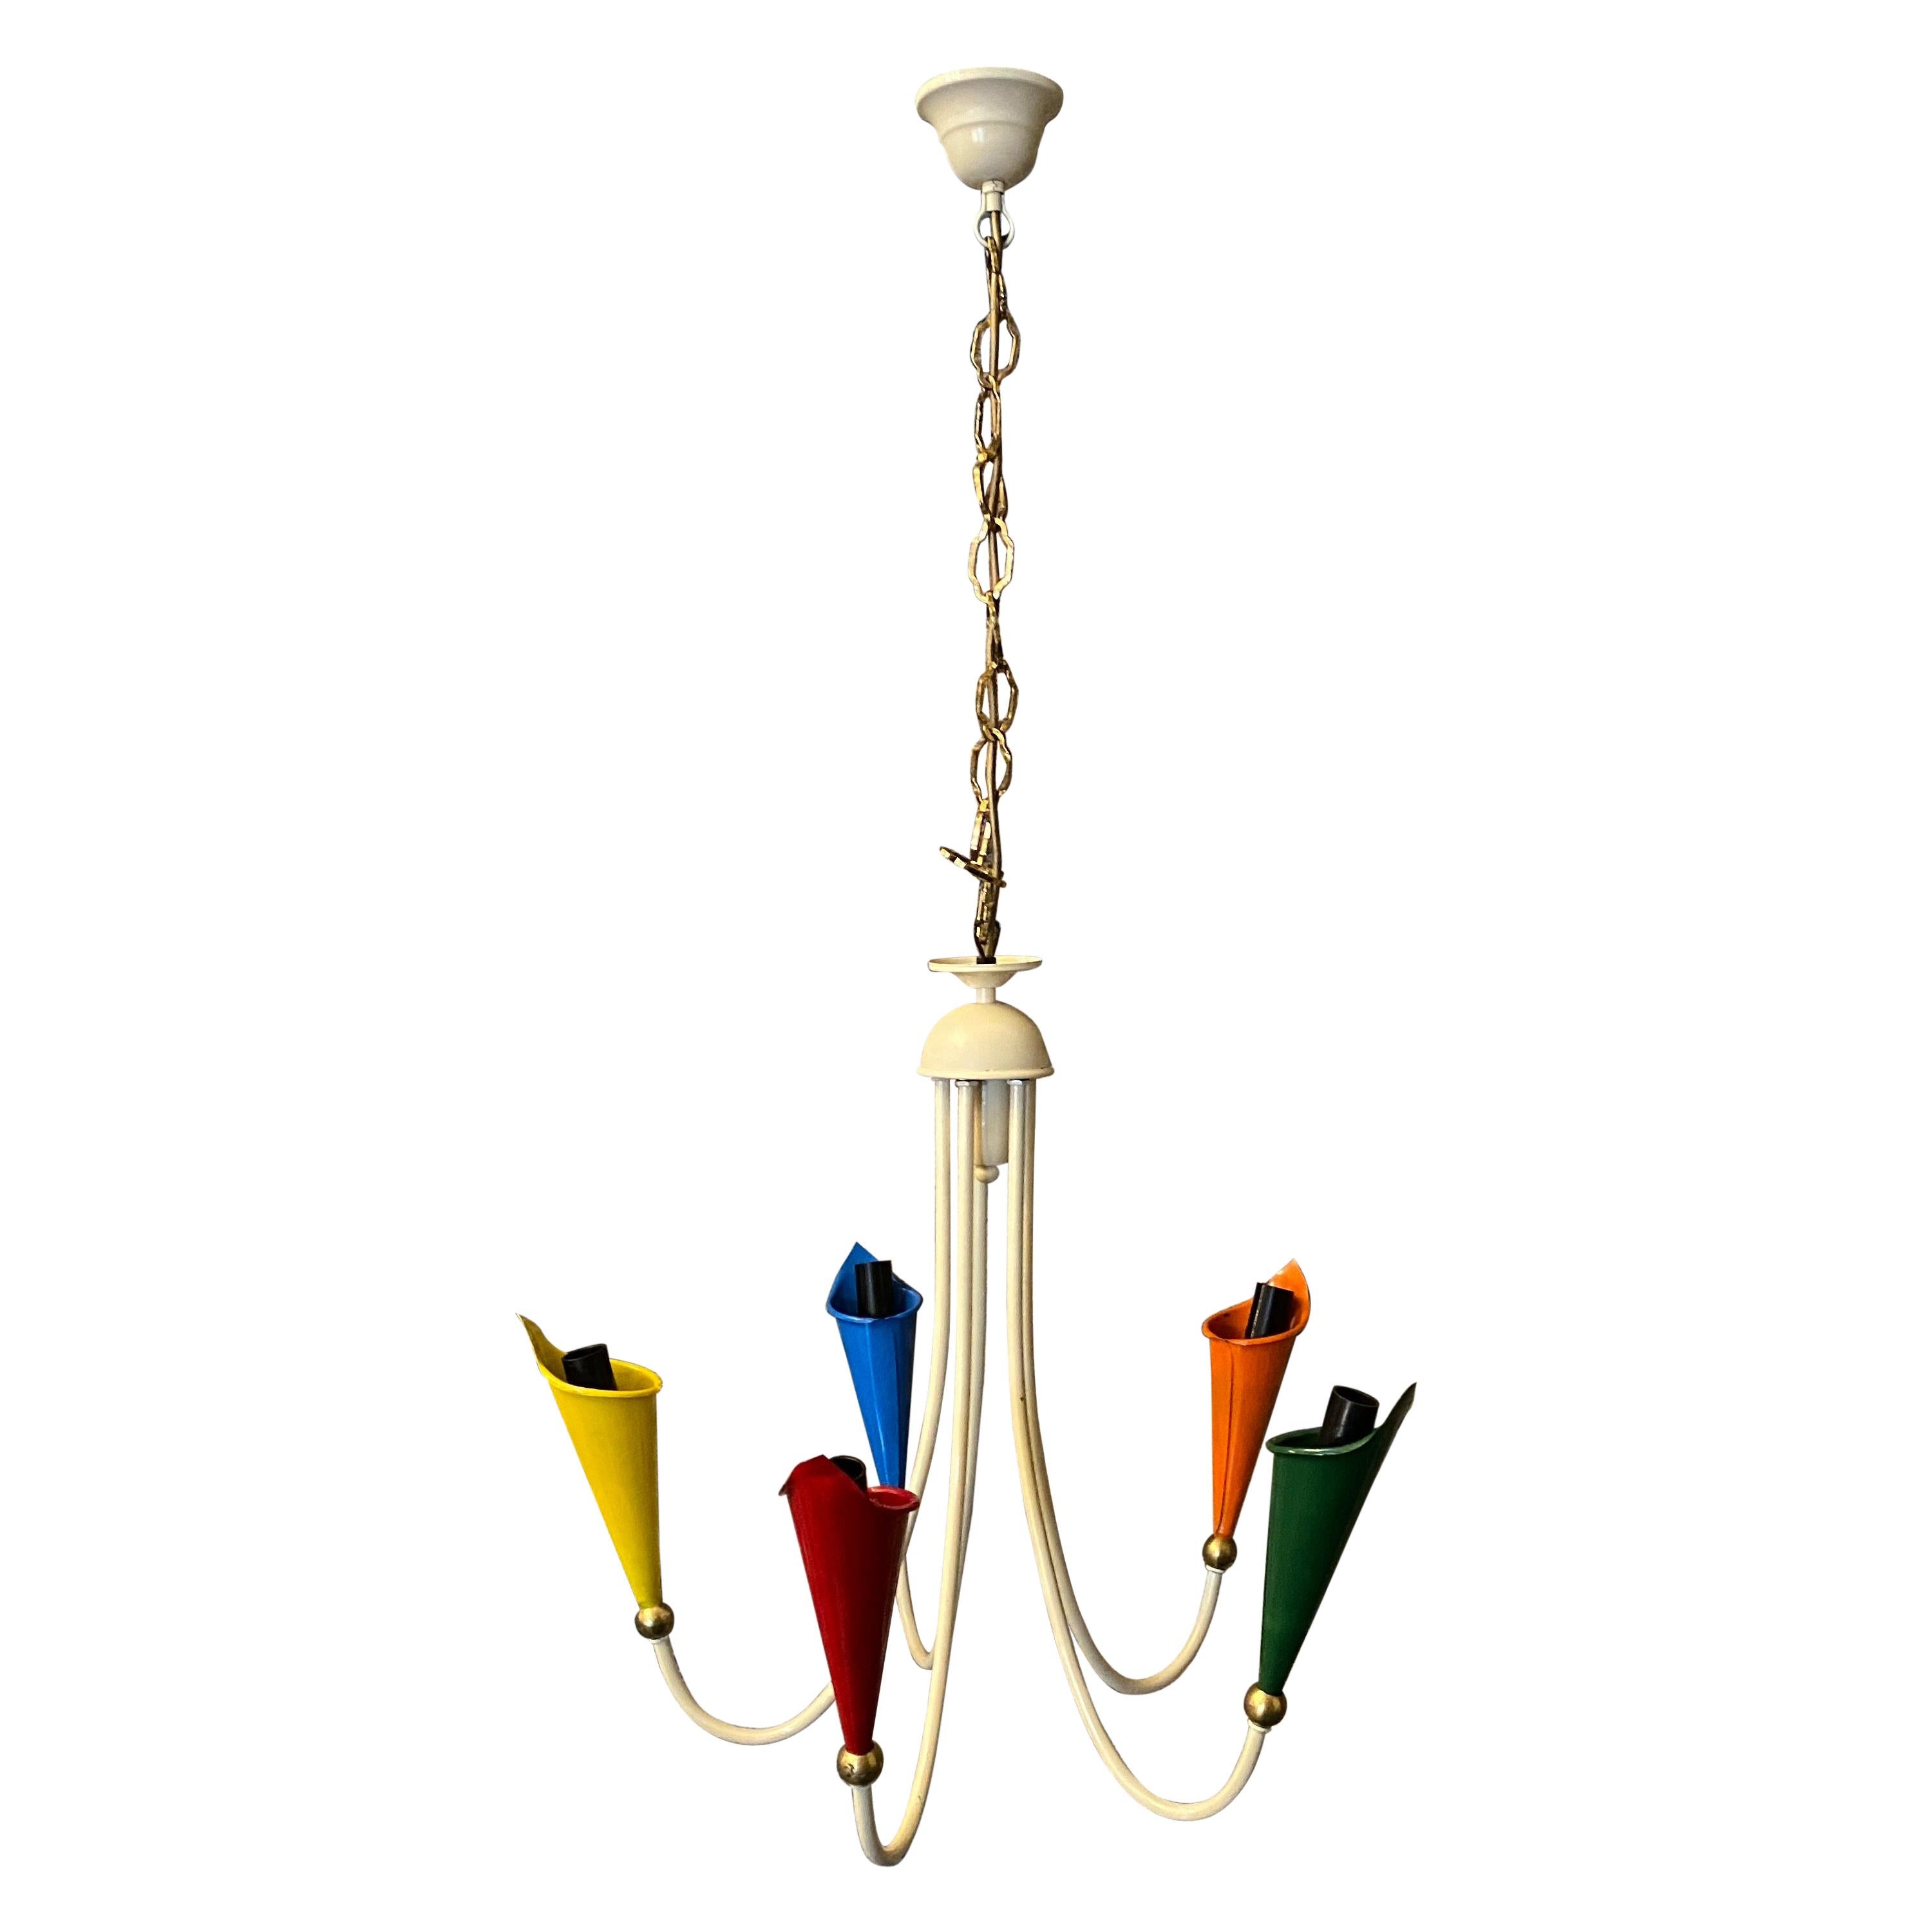 1950s Mid-Century Modern Brass and Painted Metal Italian Chandelier For Sale